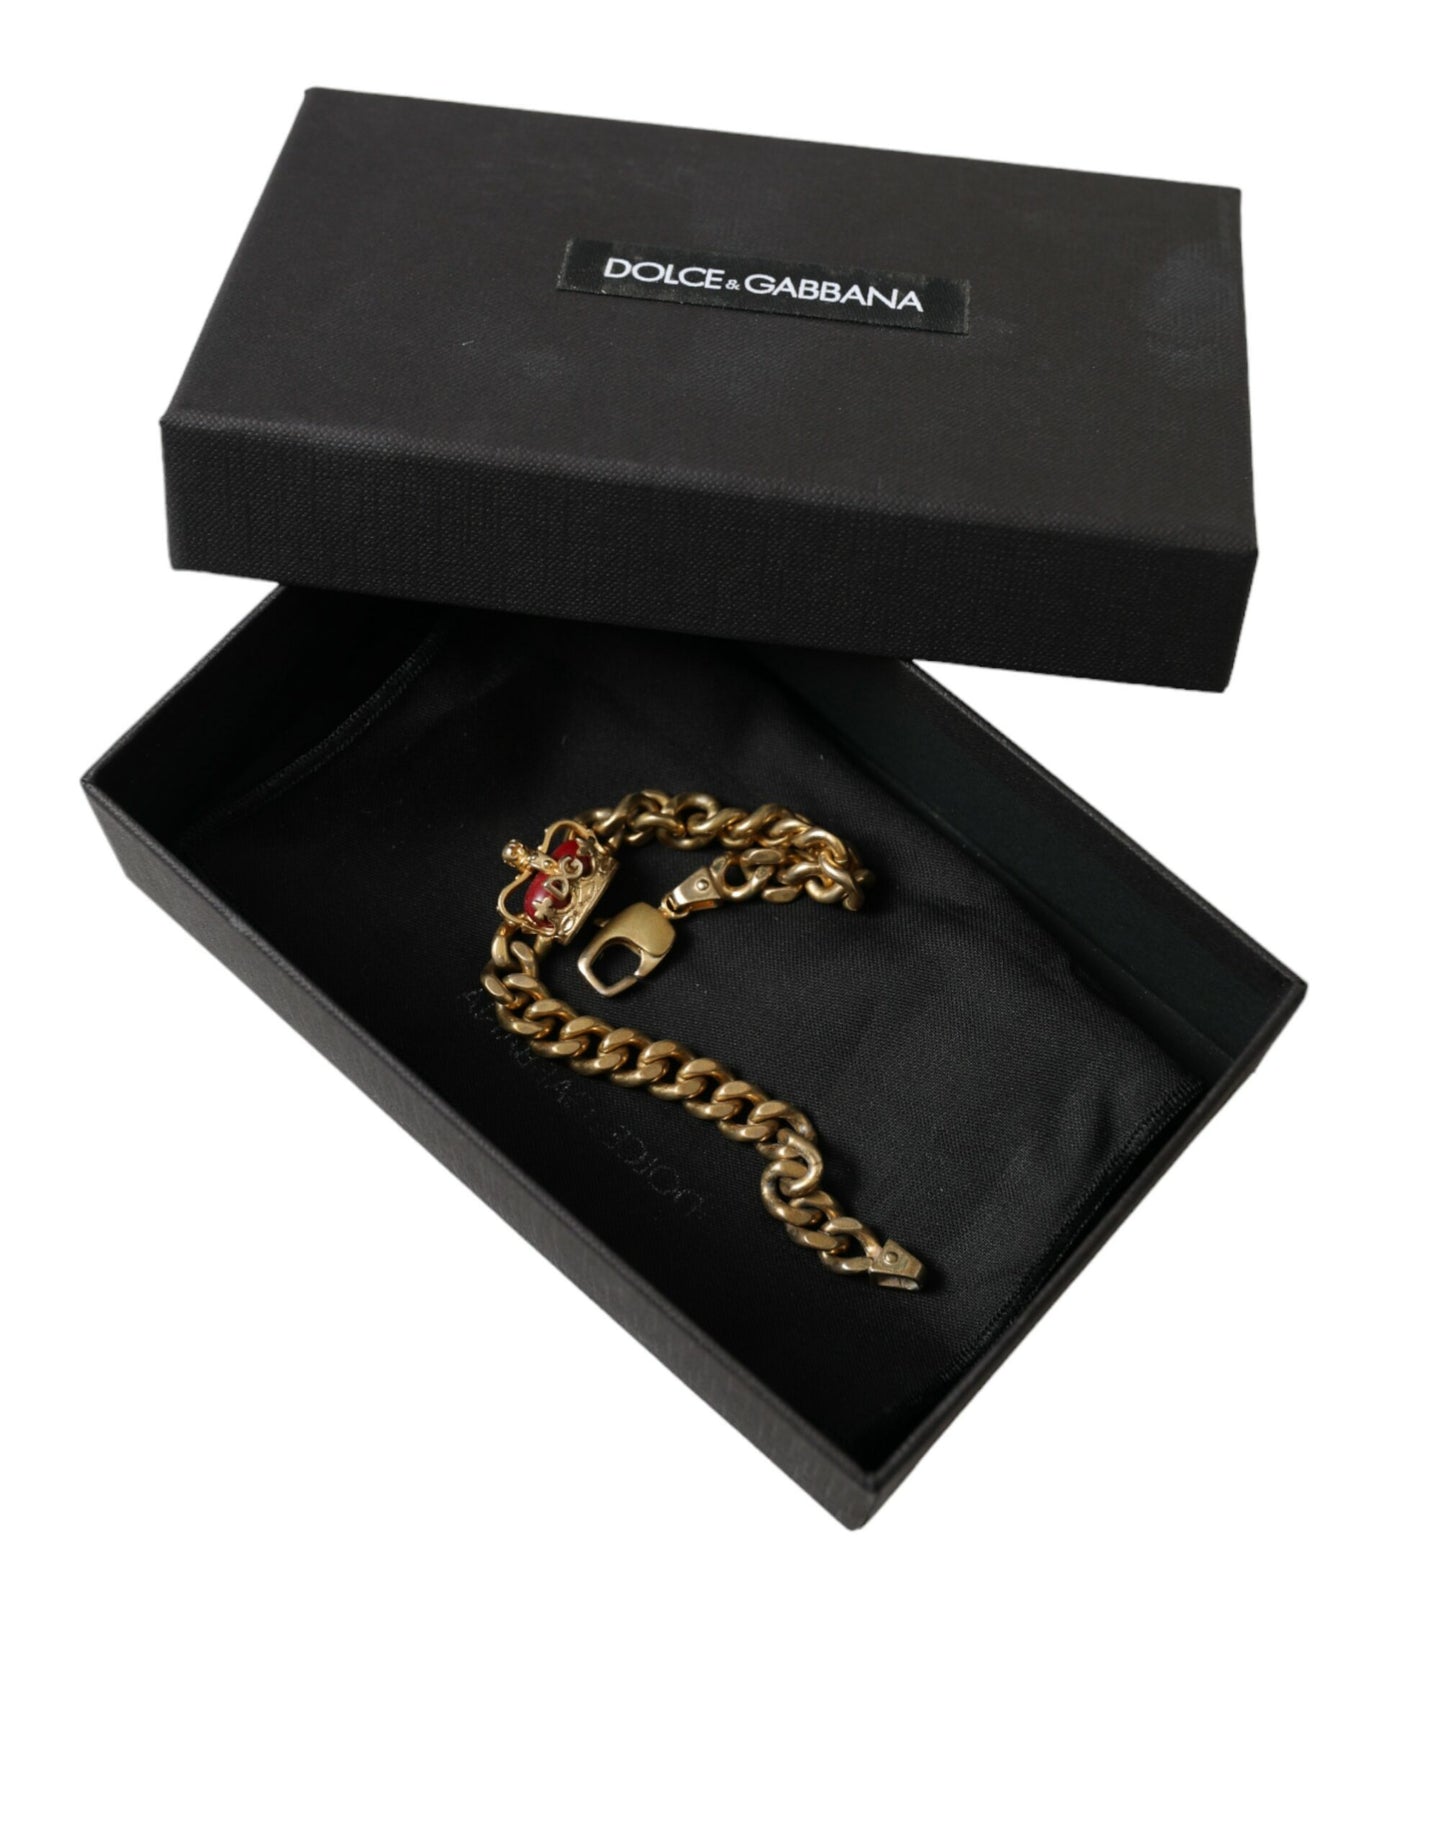 Opulent Gold-Tone Chain Bracelet with Red Accents